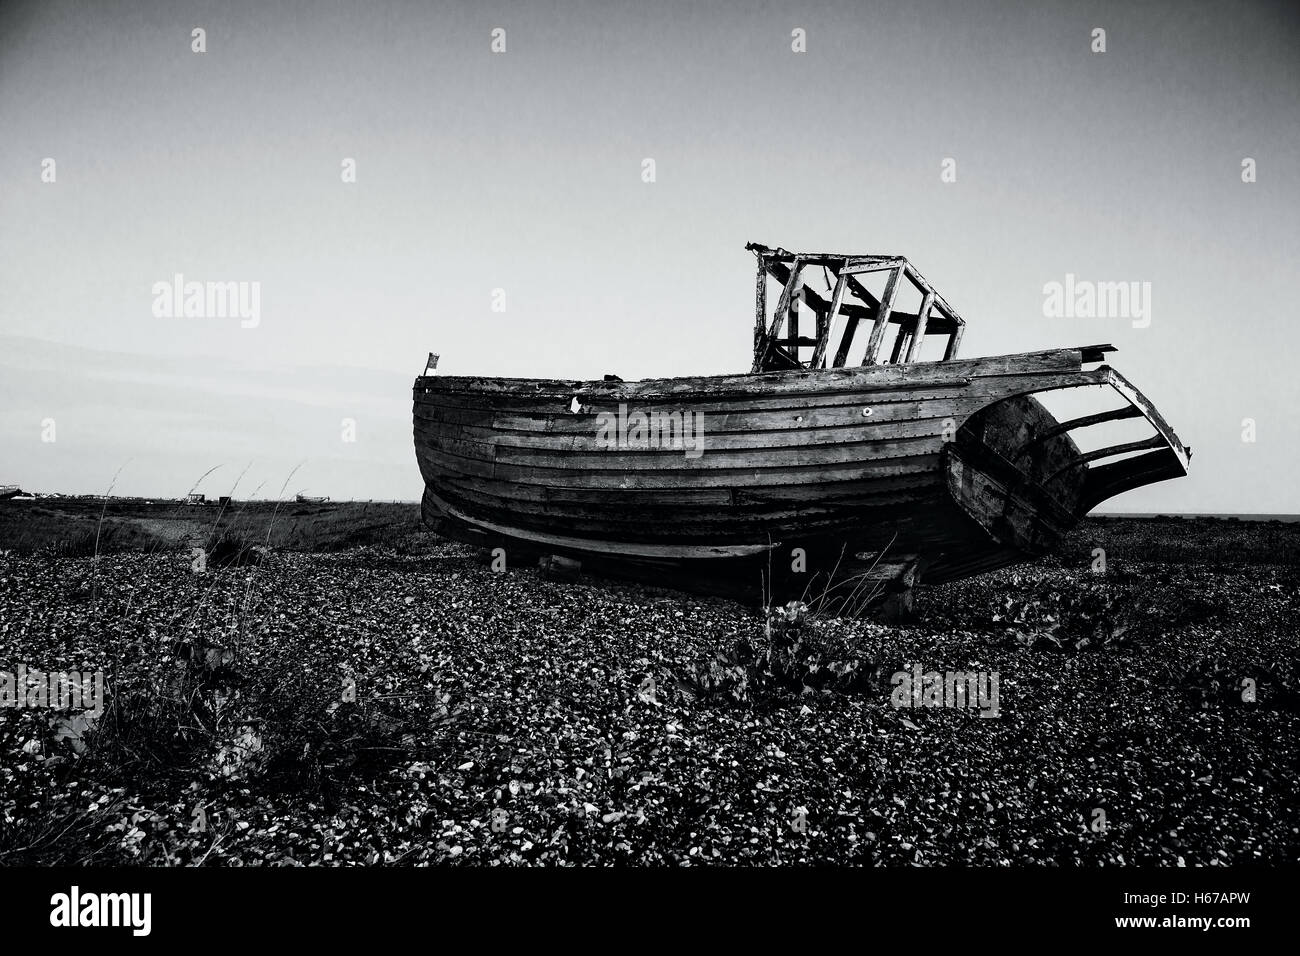 Vessel in the boat graveyard at Dungeness rendered in Black and White Stock Photo